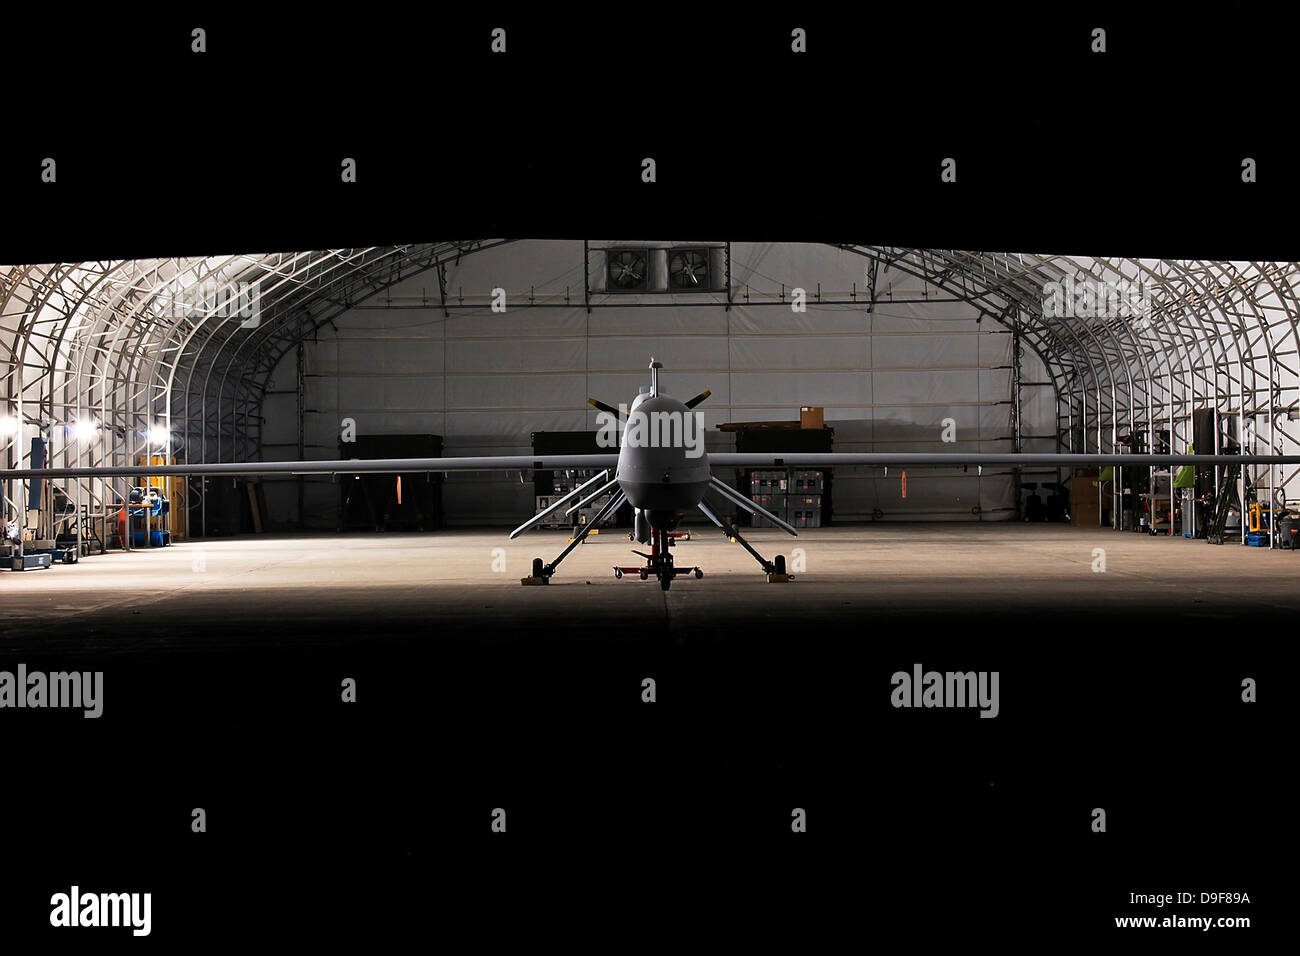 January 12, 2010 - An MQ-1C Sky Warrior unmanned aerial vehicle is parked in a hangar at Camp Taji, Iraq. Stock Photo